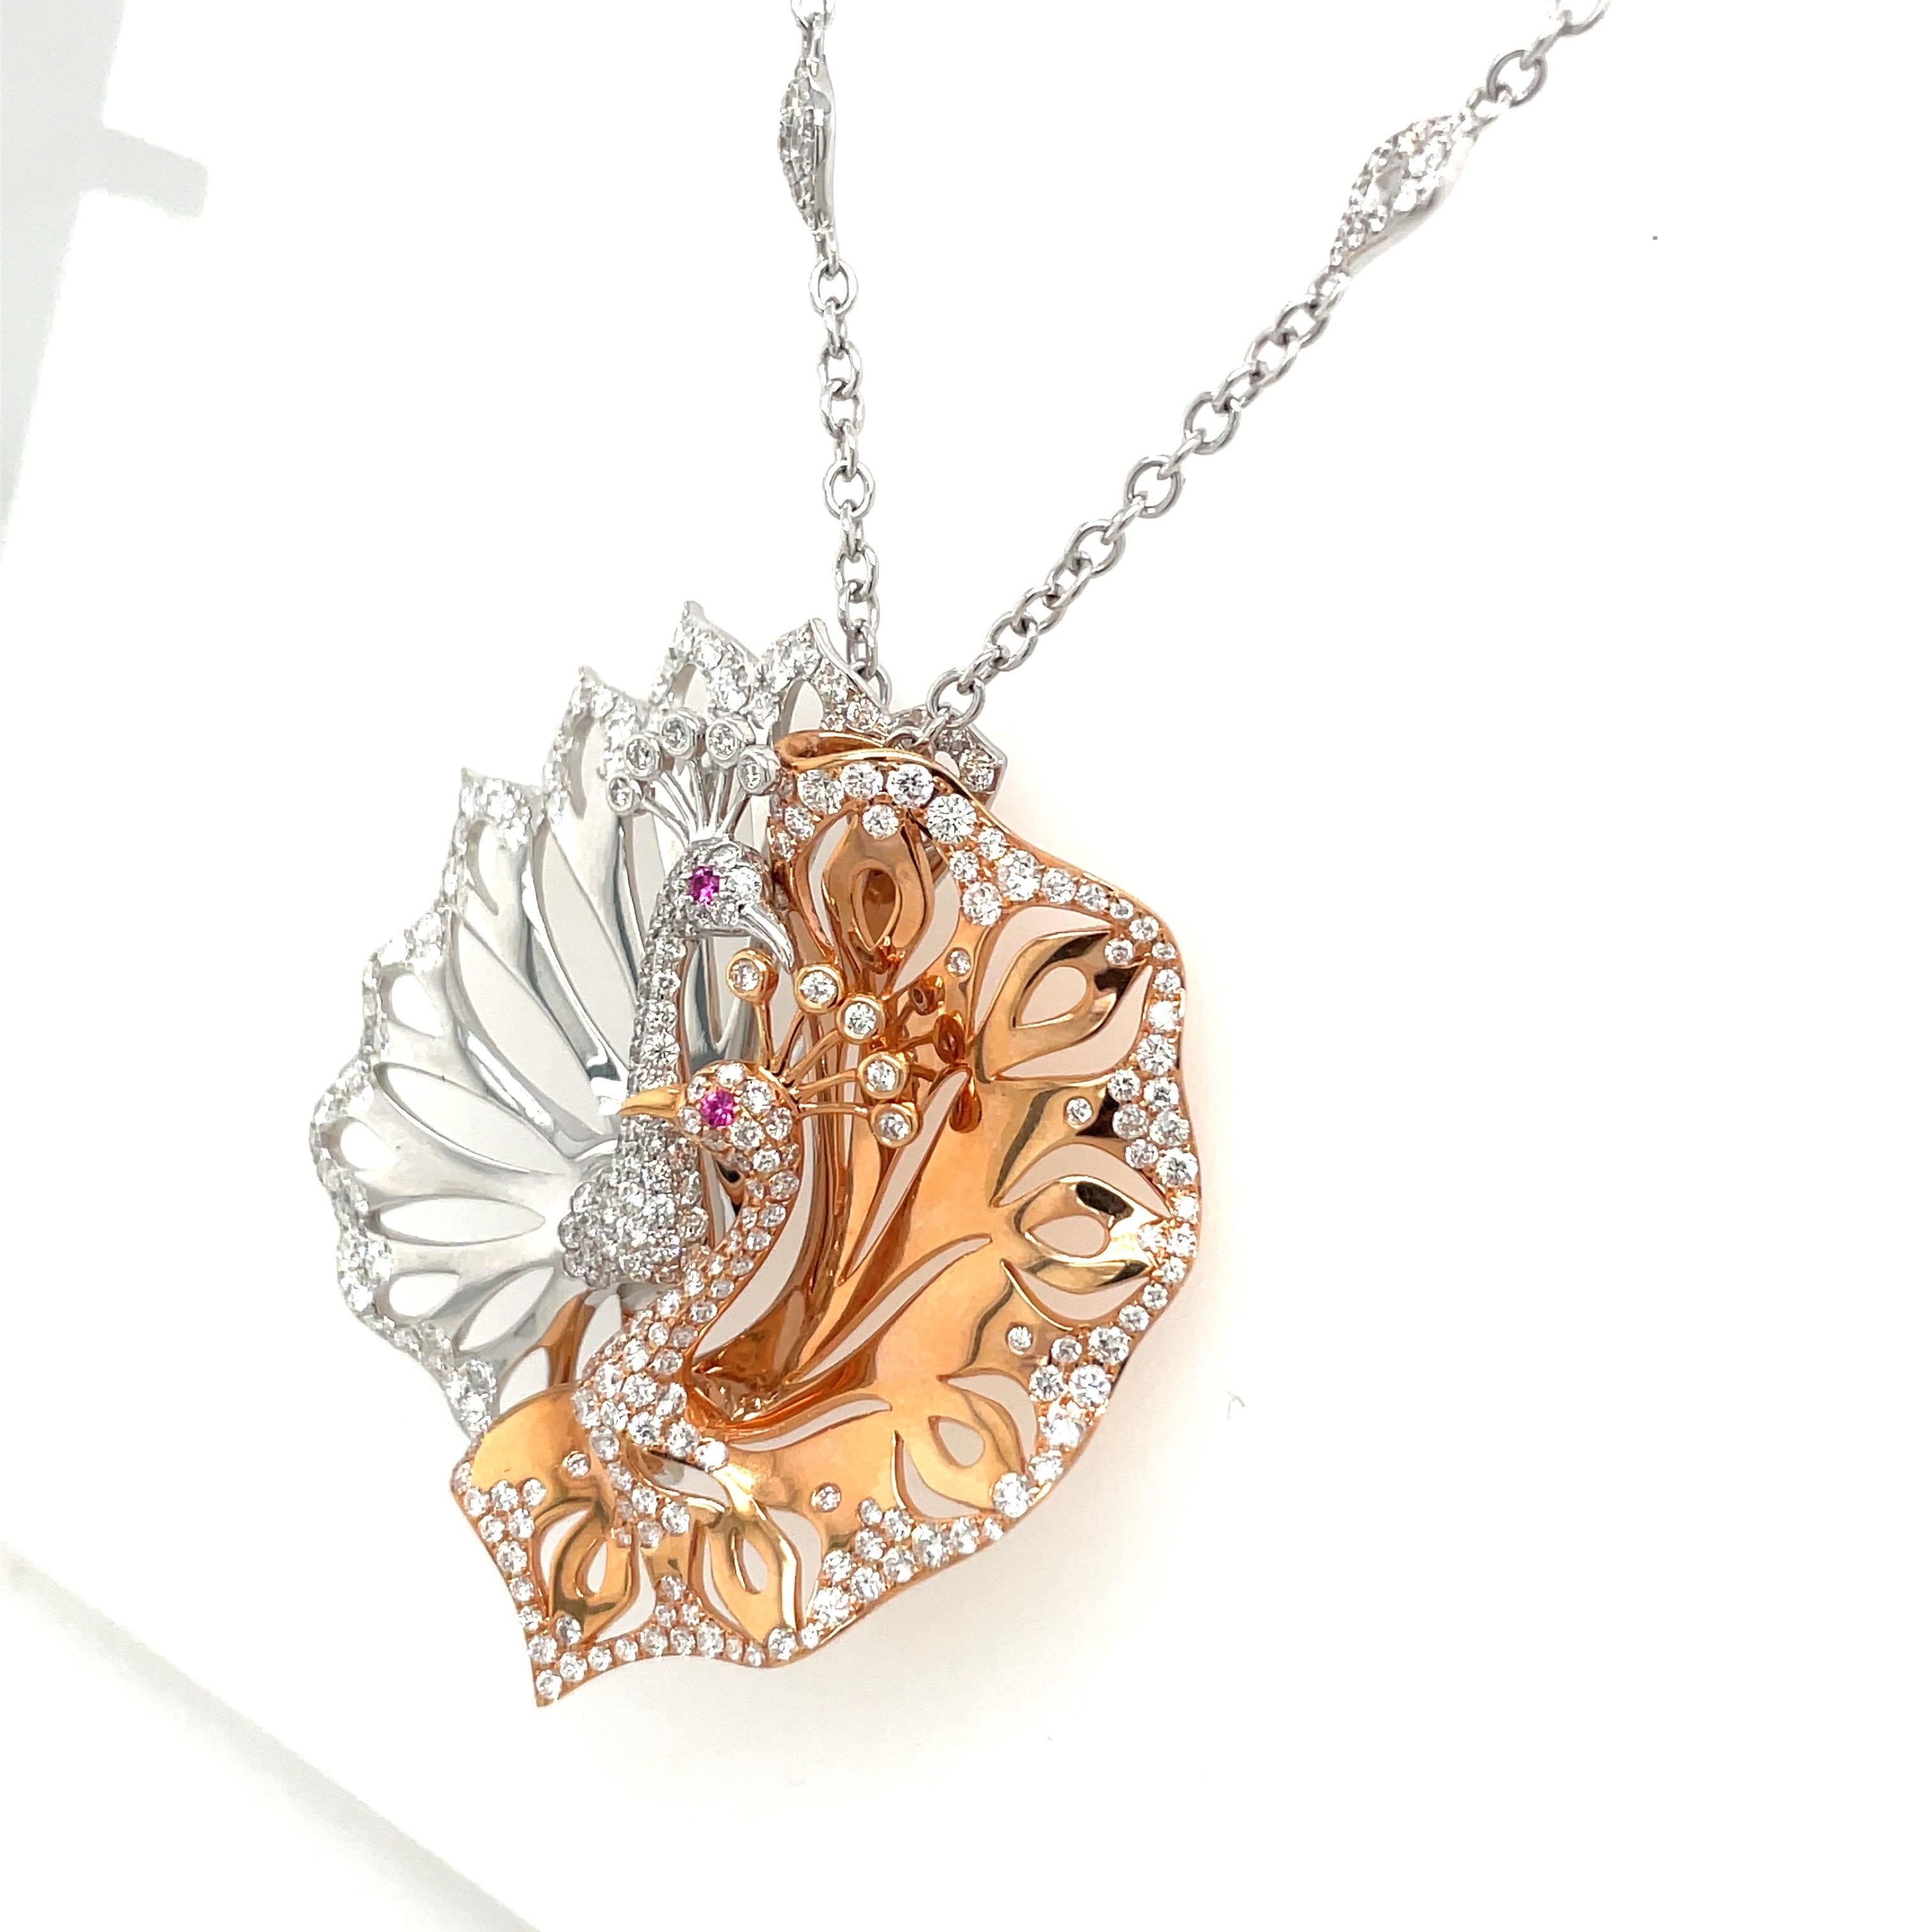 Contemporary 18KT Rose & White Gold Twin Peacocks Pendant with 2.42Ct. Diamonds